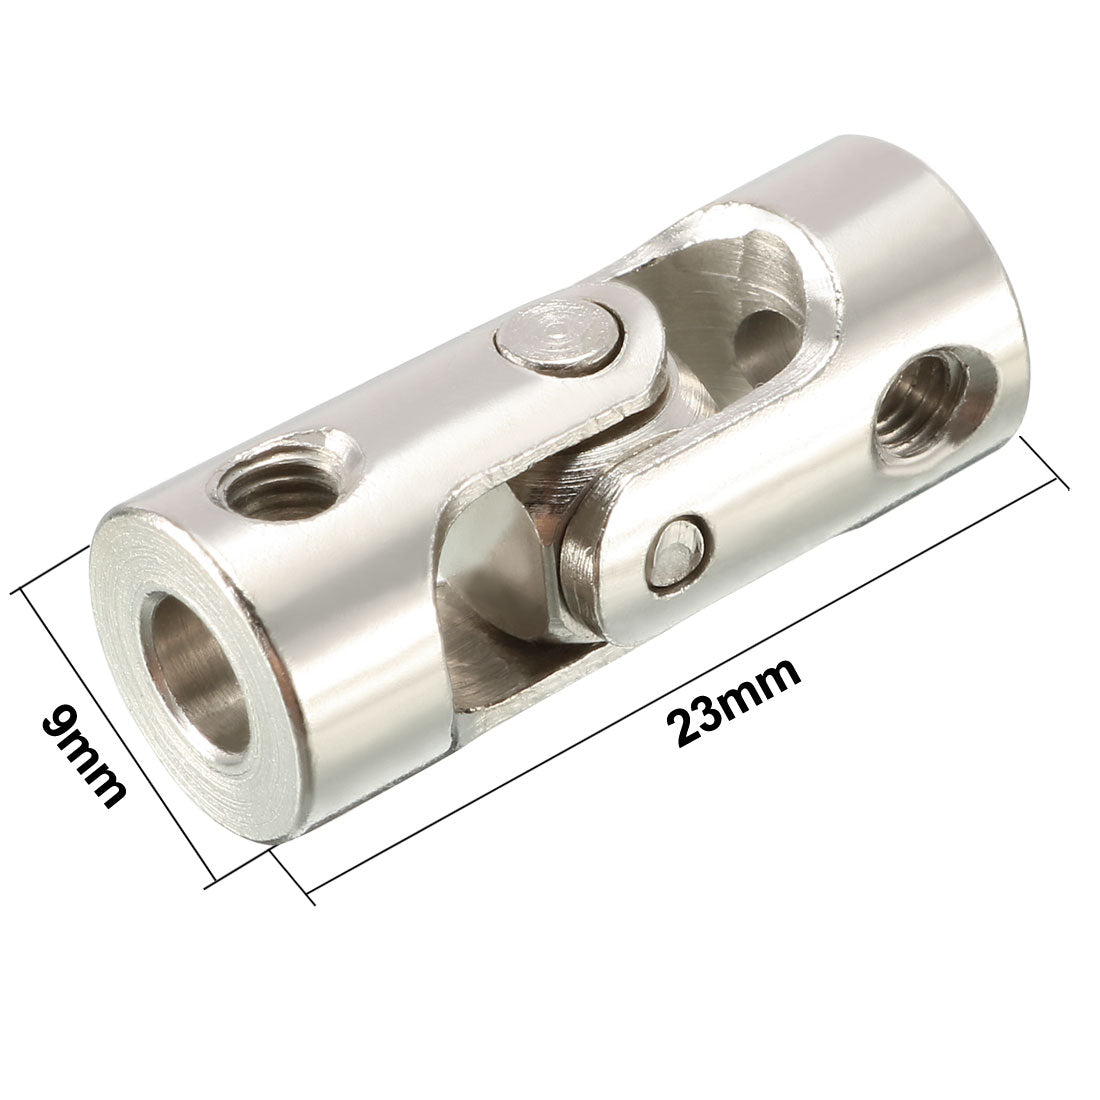 uxcell Uxcell 2pcs 3.175mm to 4mm Inner Dia Rotatable Universal Steering Shaft U Joint Coupler L23XD9